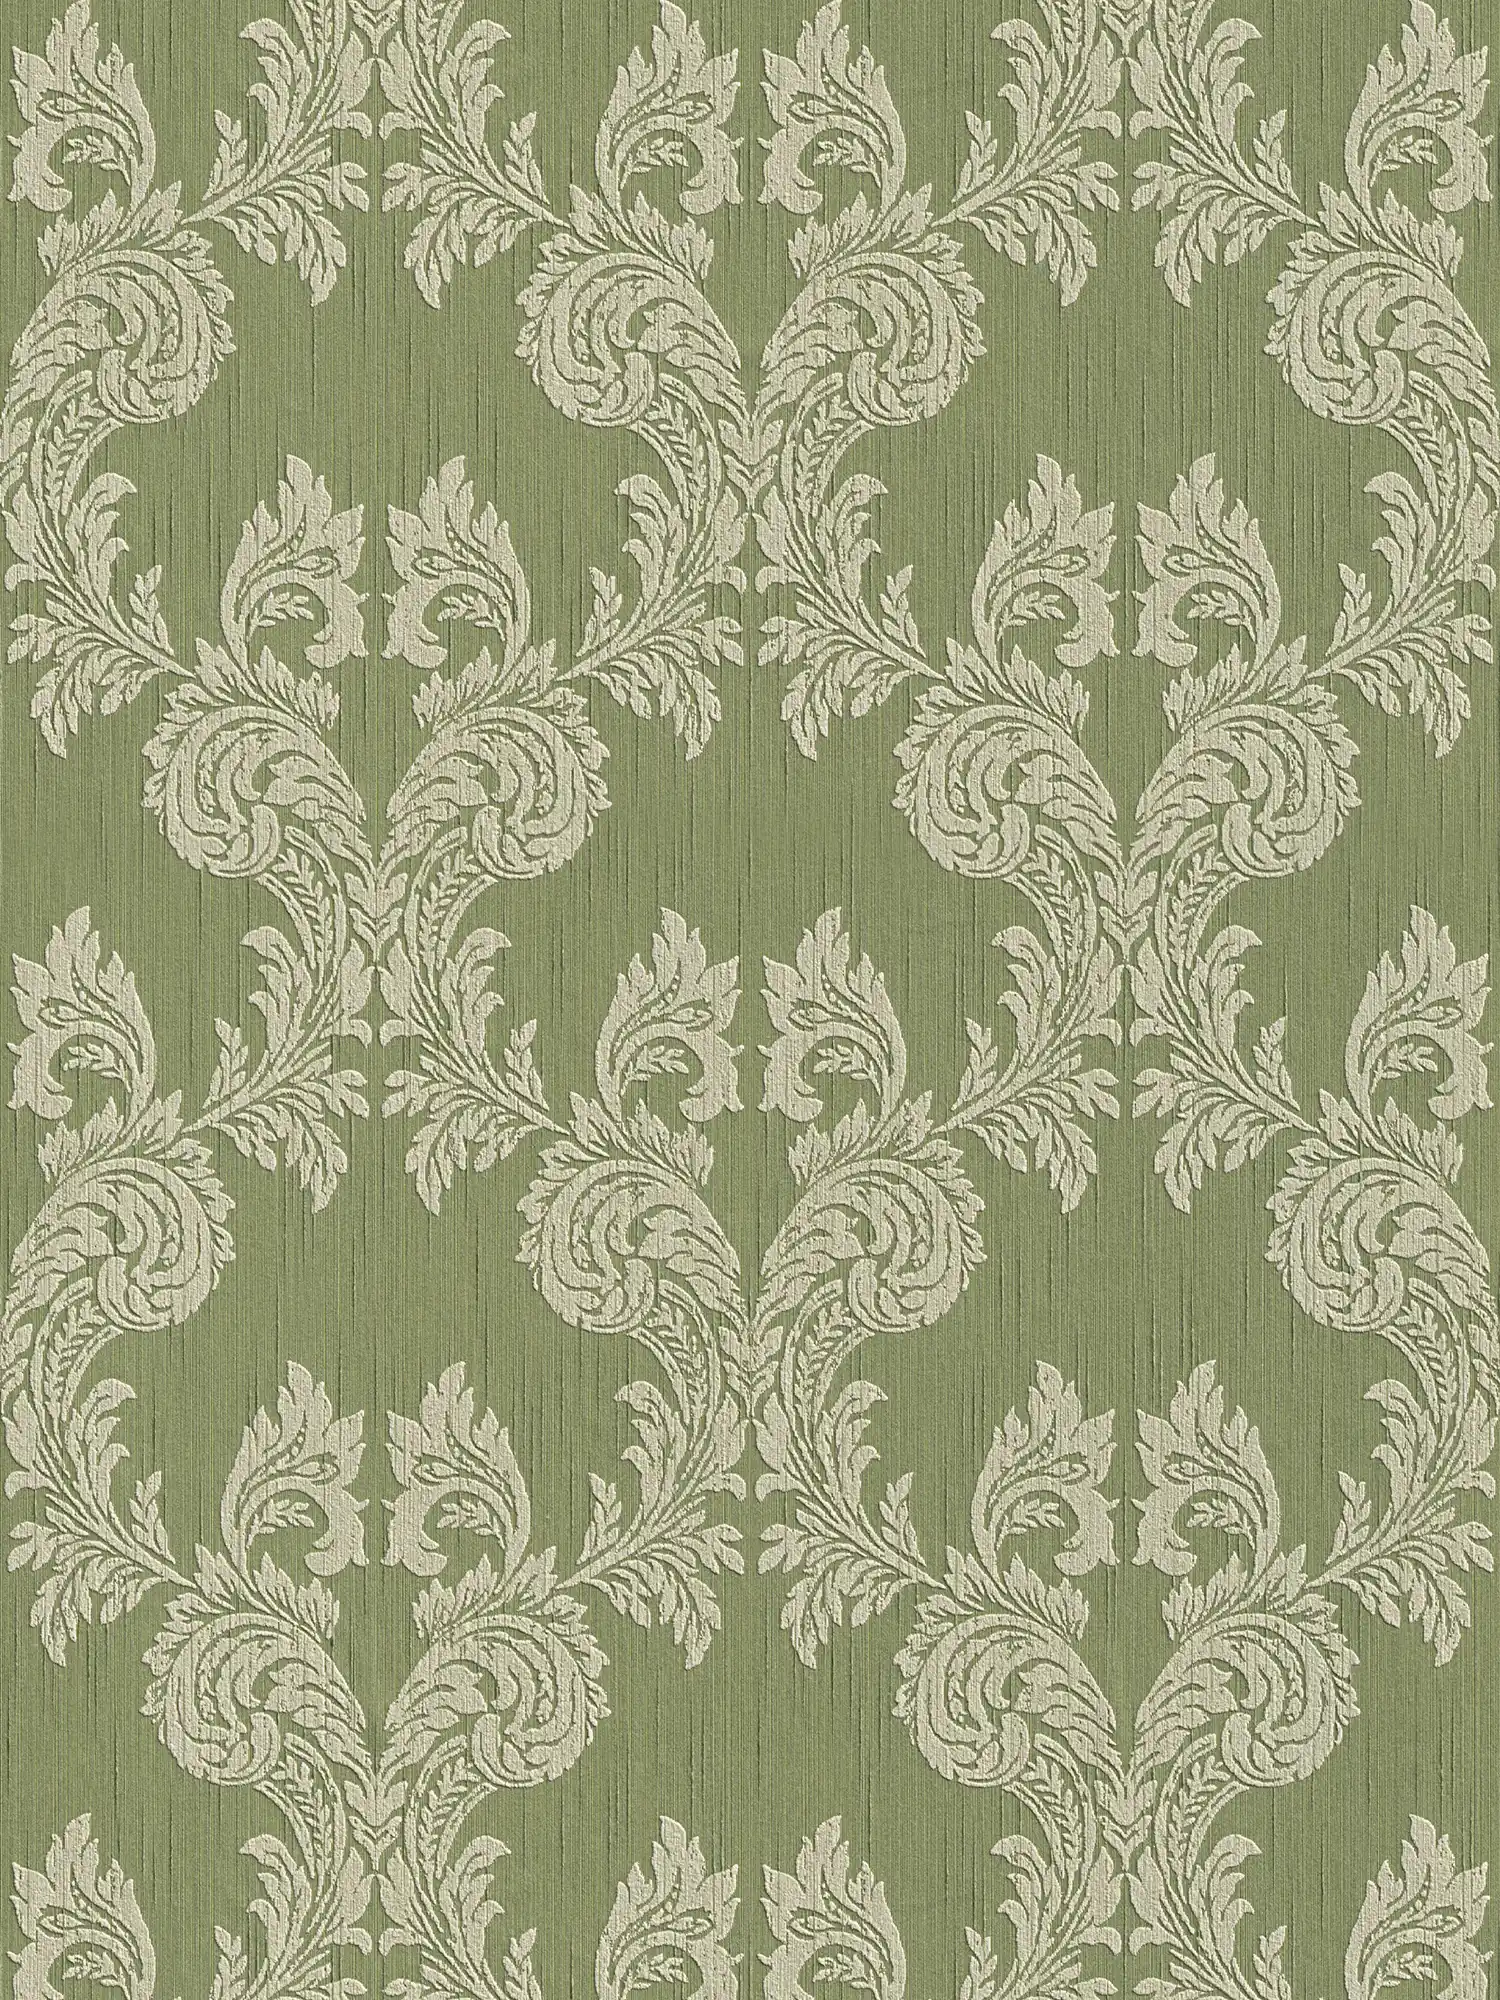 Ornamental wallpaper with floral pattern & texture effect - green
